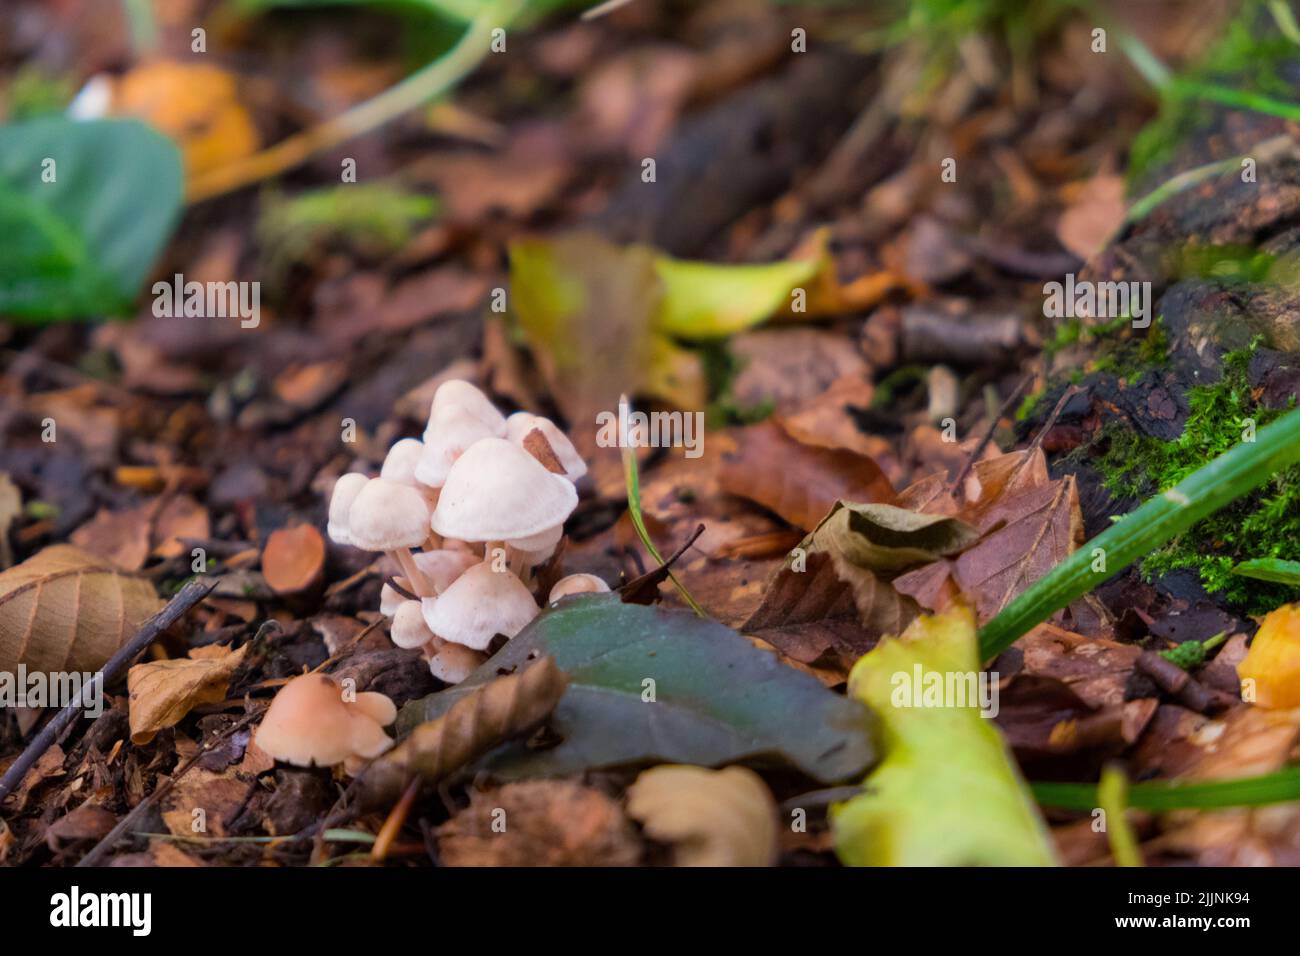 A closeup of small white mushrooms in the forest. Candolleomyces candolleana. Stock Photo